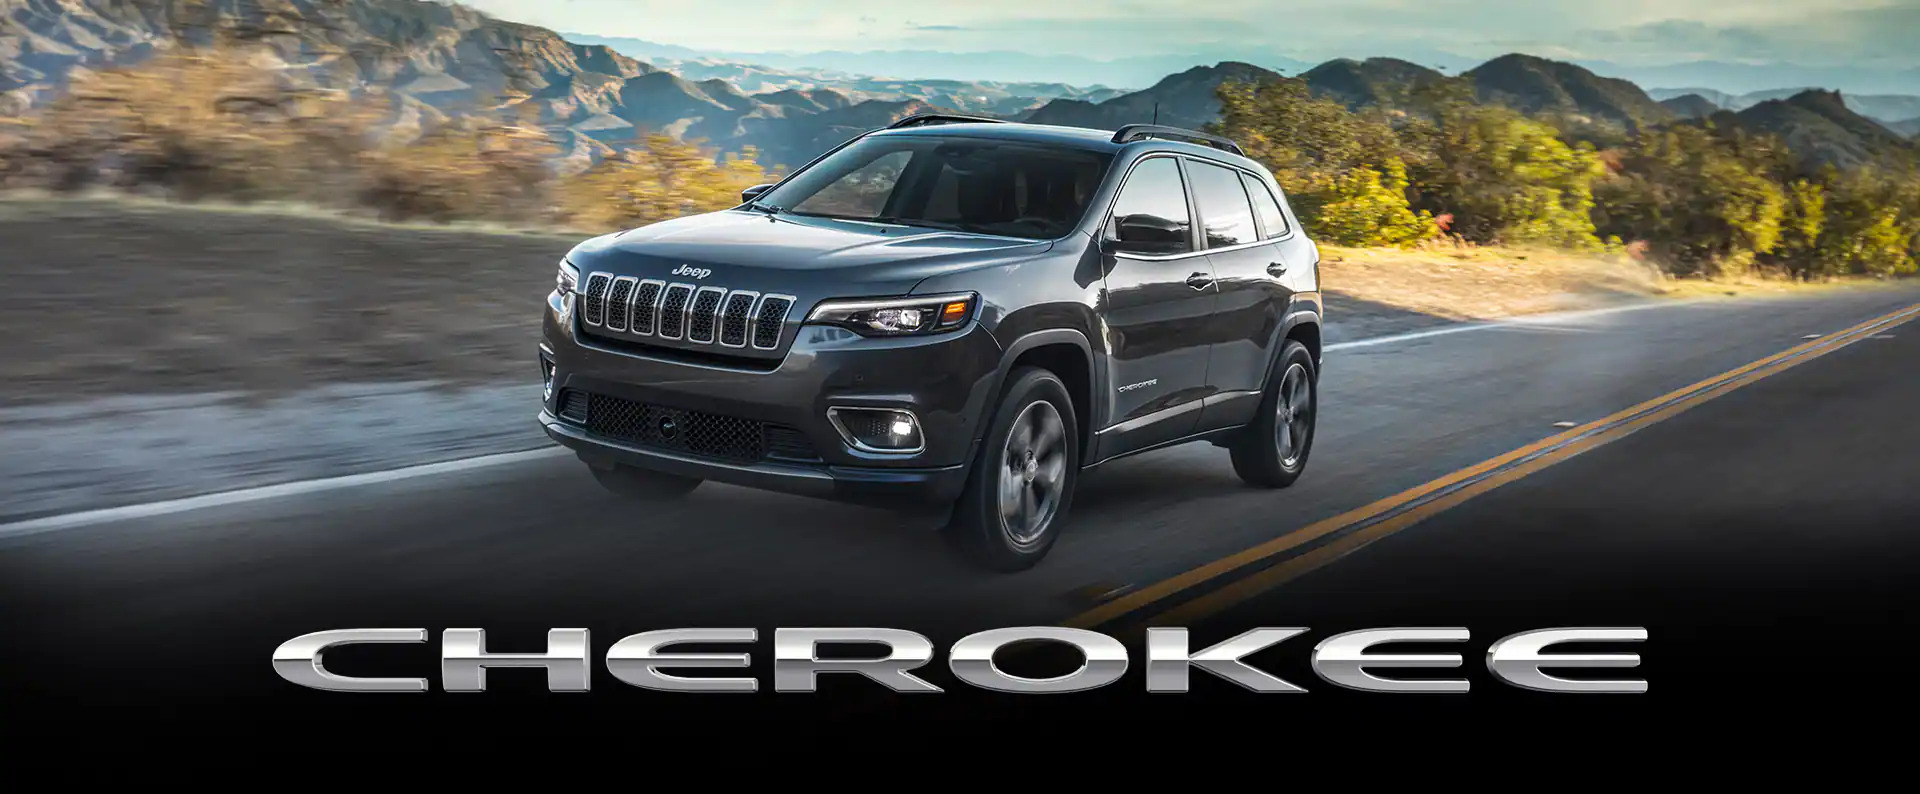 Jeep Grand Cherokee to be launched in India later this year